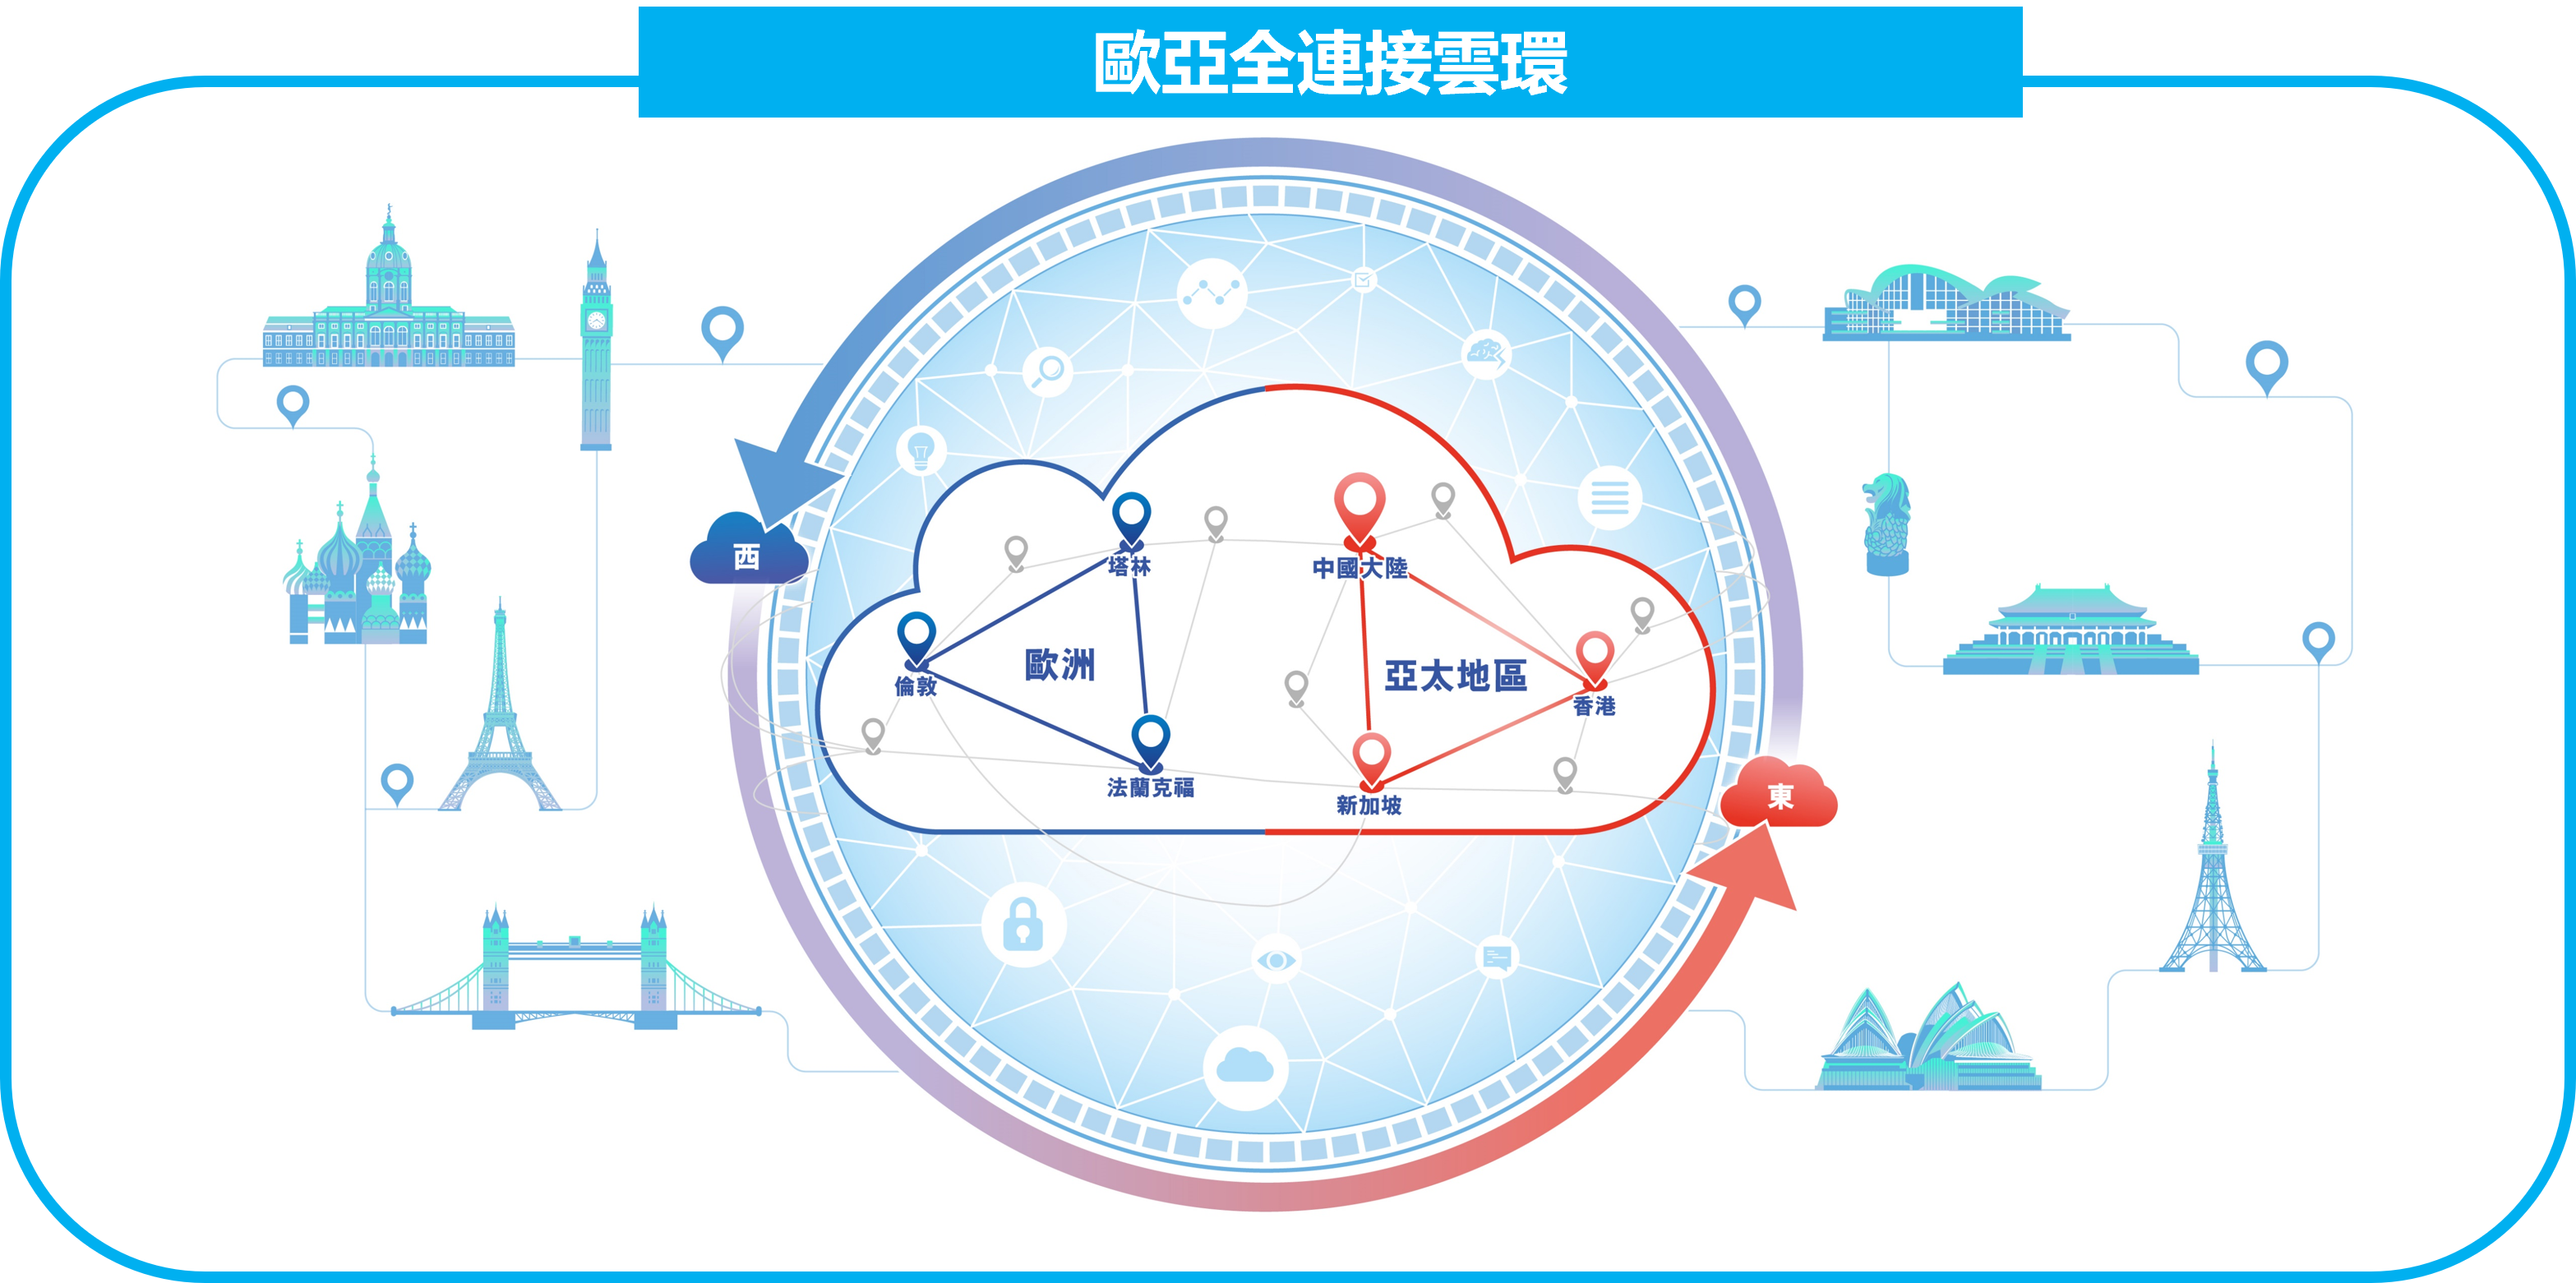 CITIC Telecom CPC strives to accelerate the digital transformation of enterprises (Chinese Only)